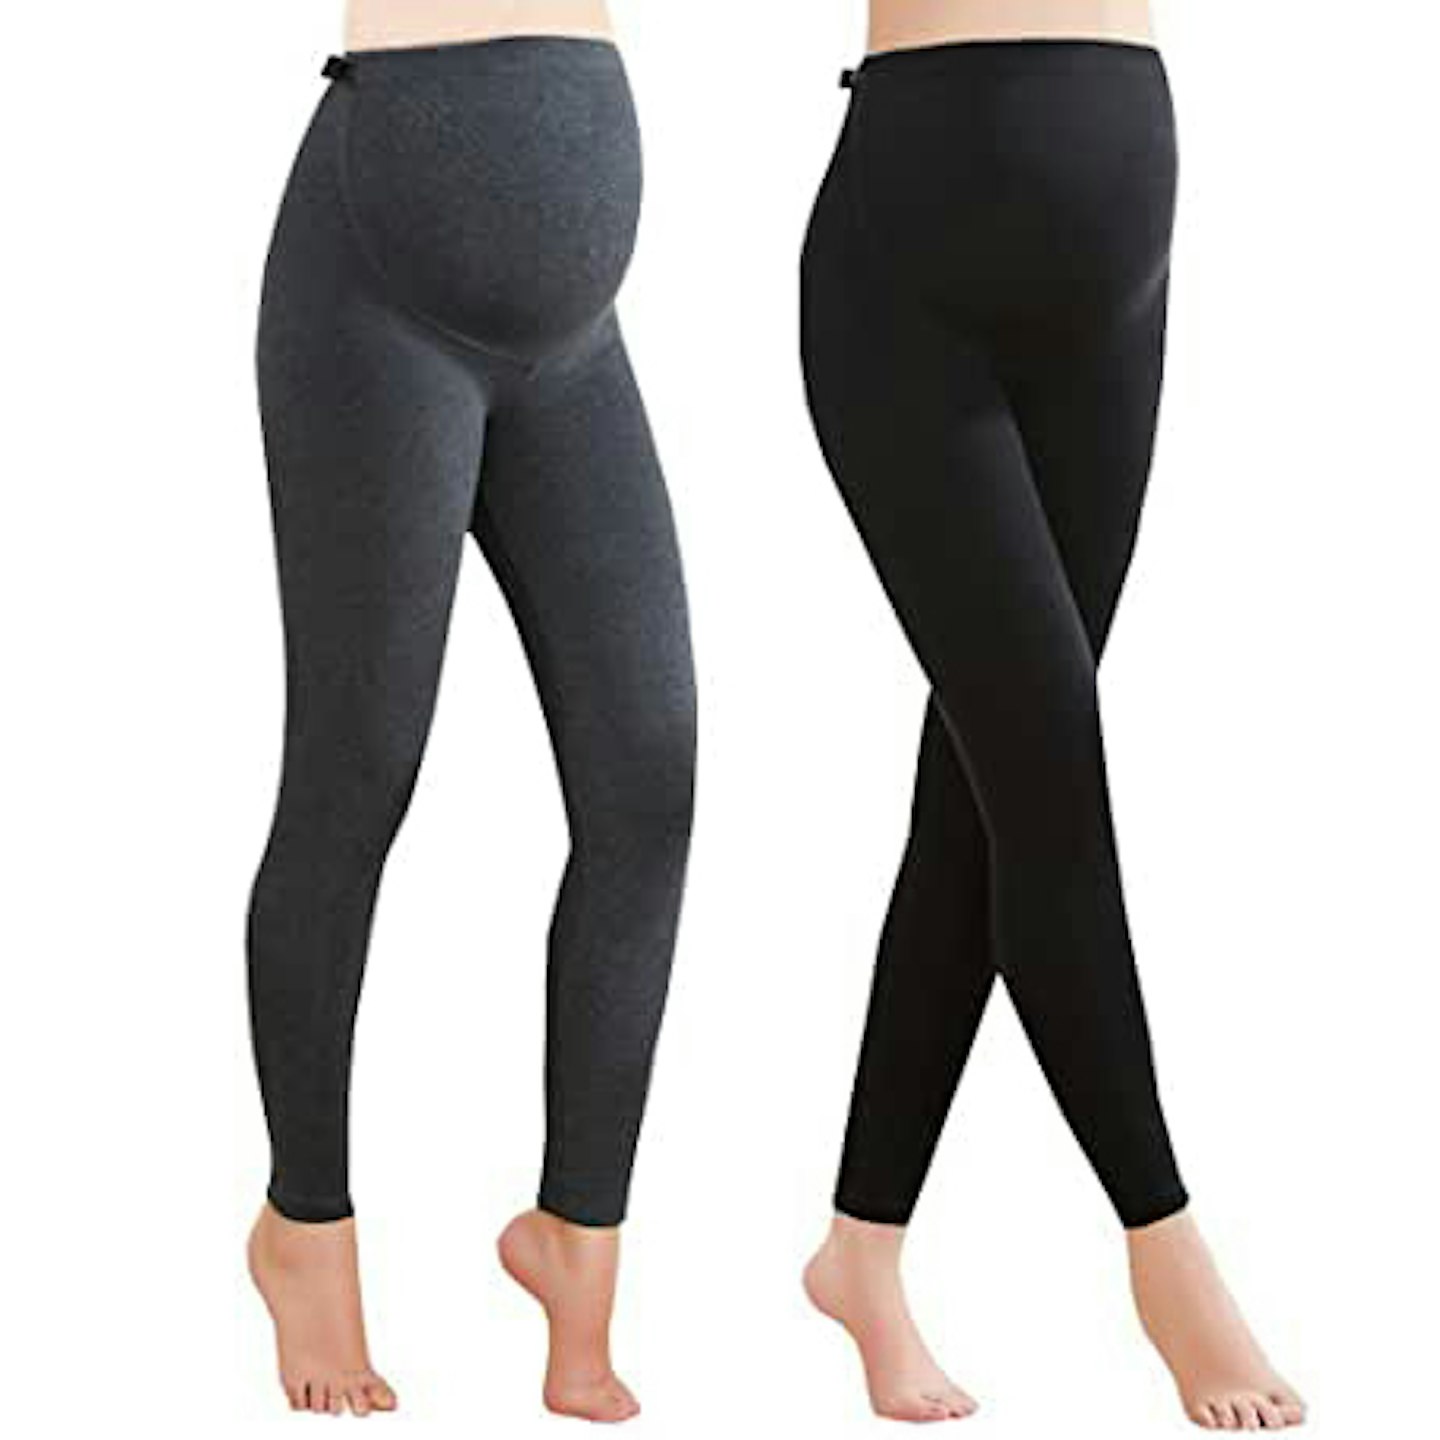 Buy JoJo Maman Bébé 2-Pack Supersoft Maternity Leggings from the